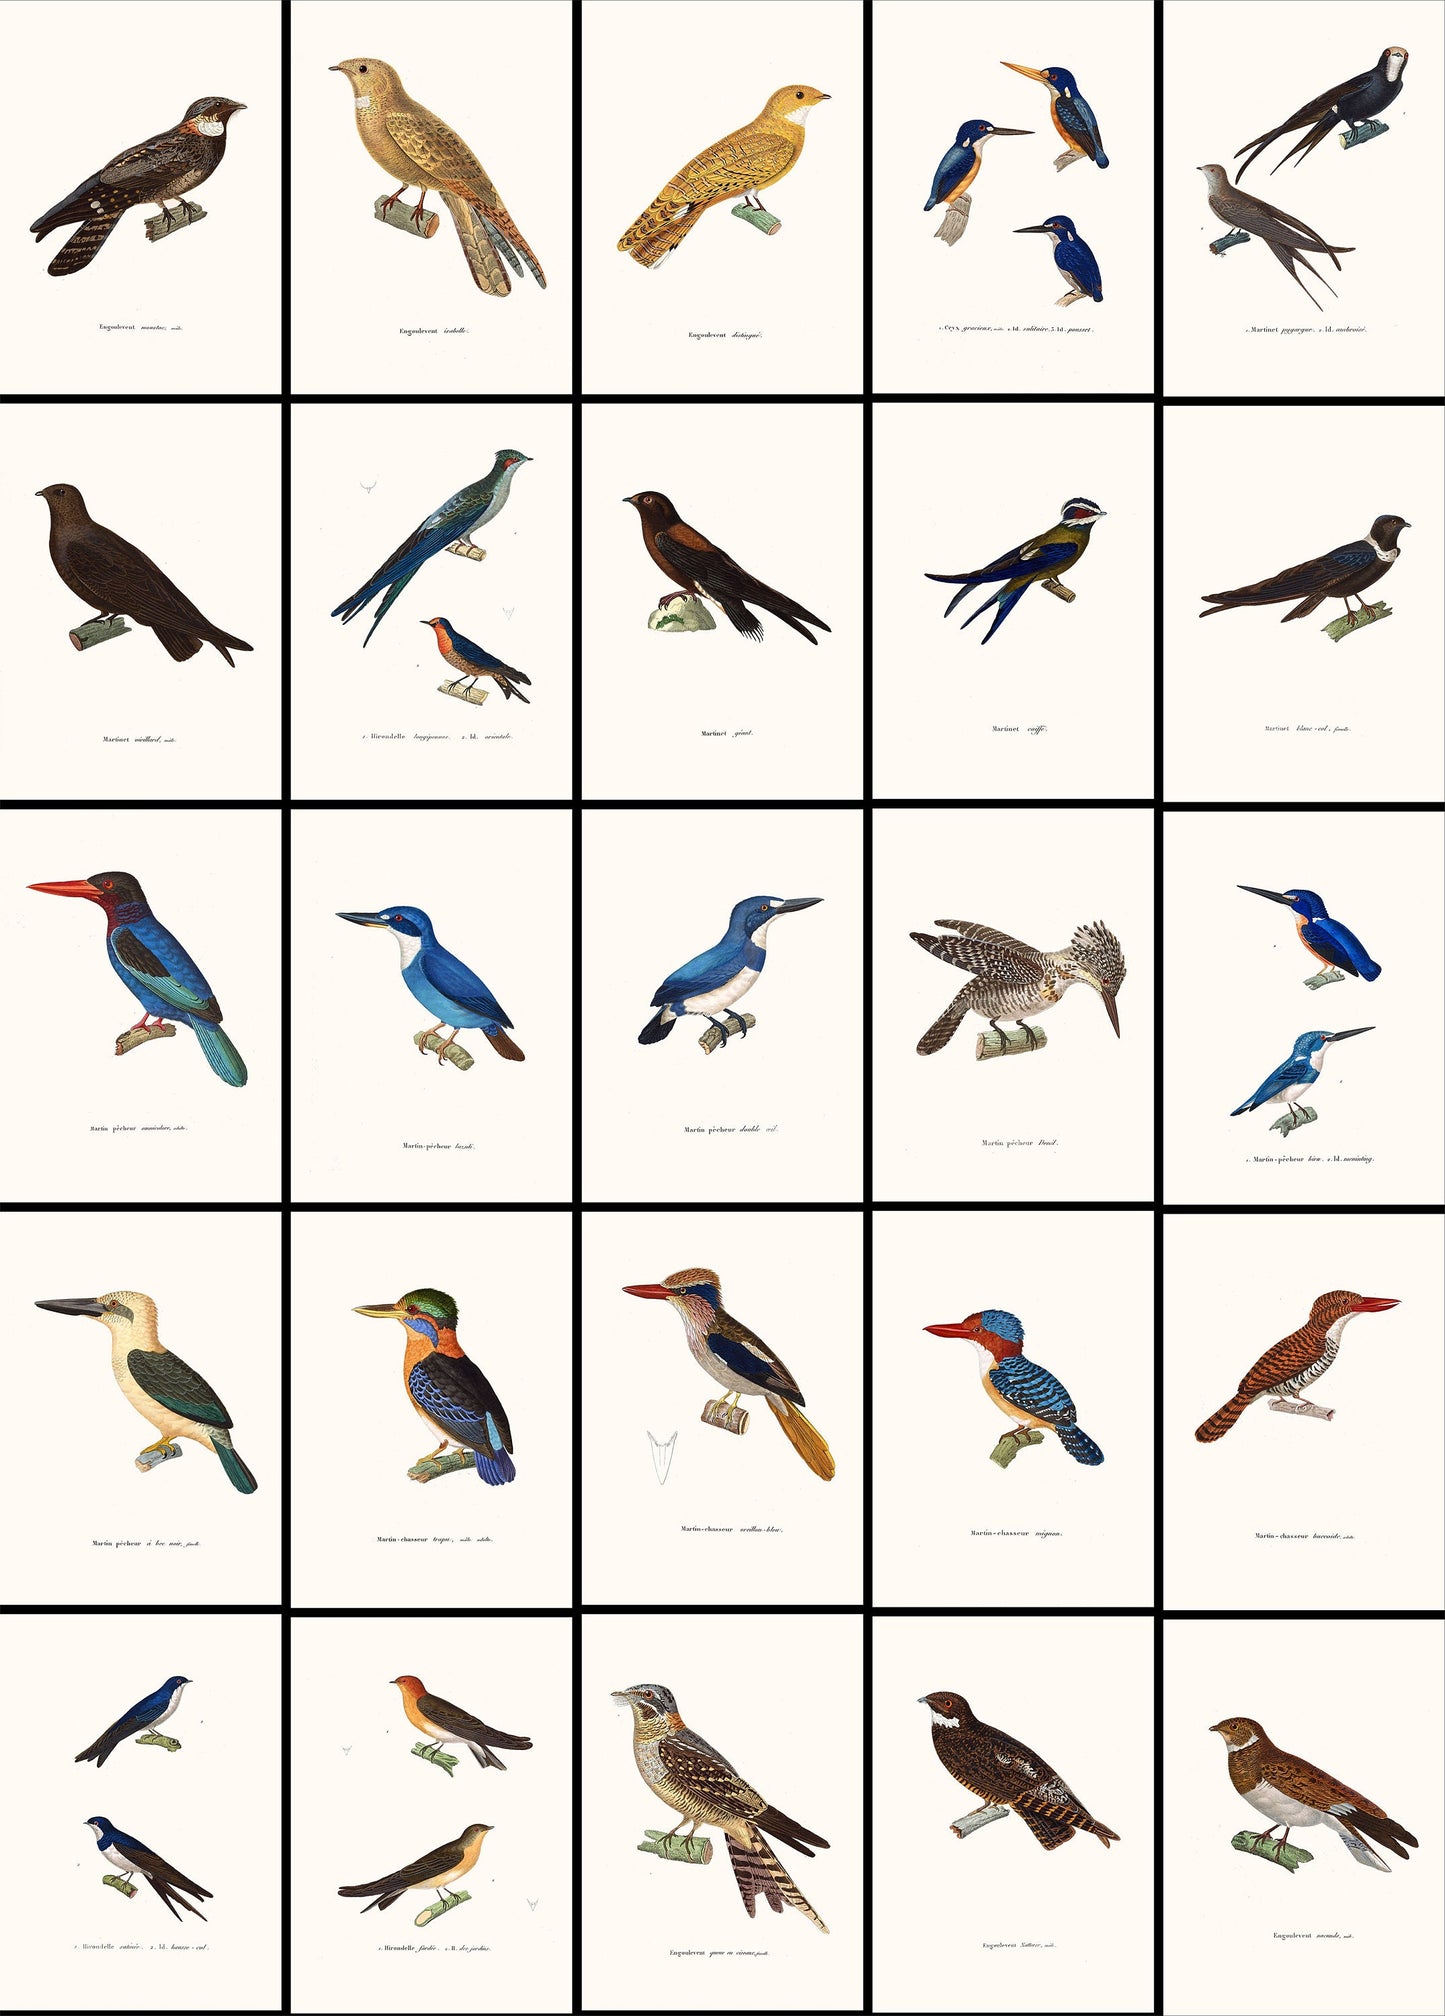 The New Collection of Painted Birds Nightjars & Martins [25 Images]